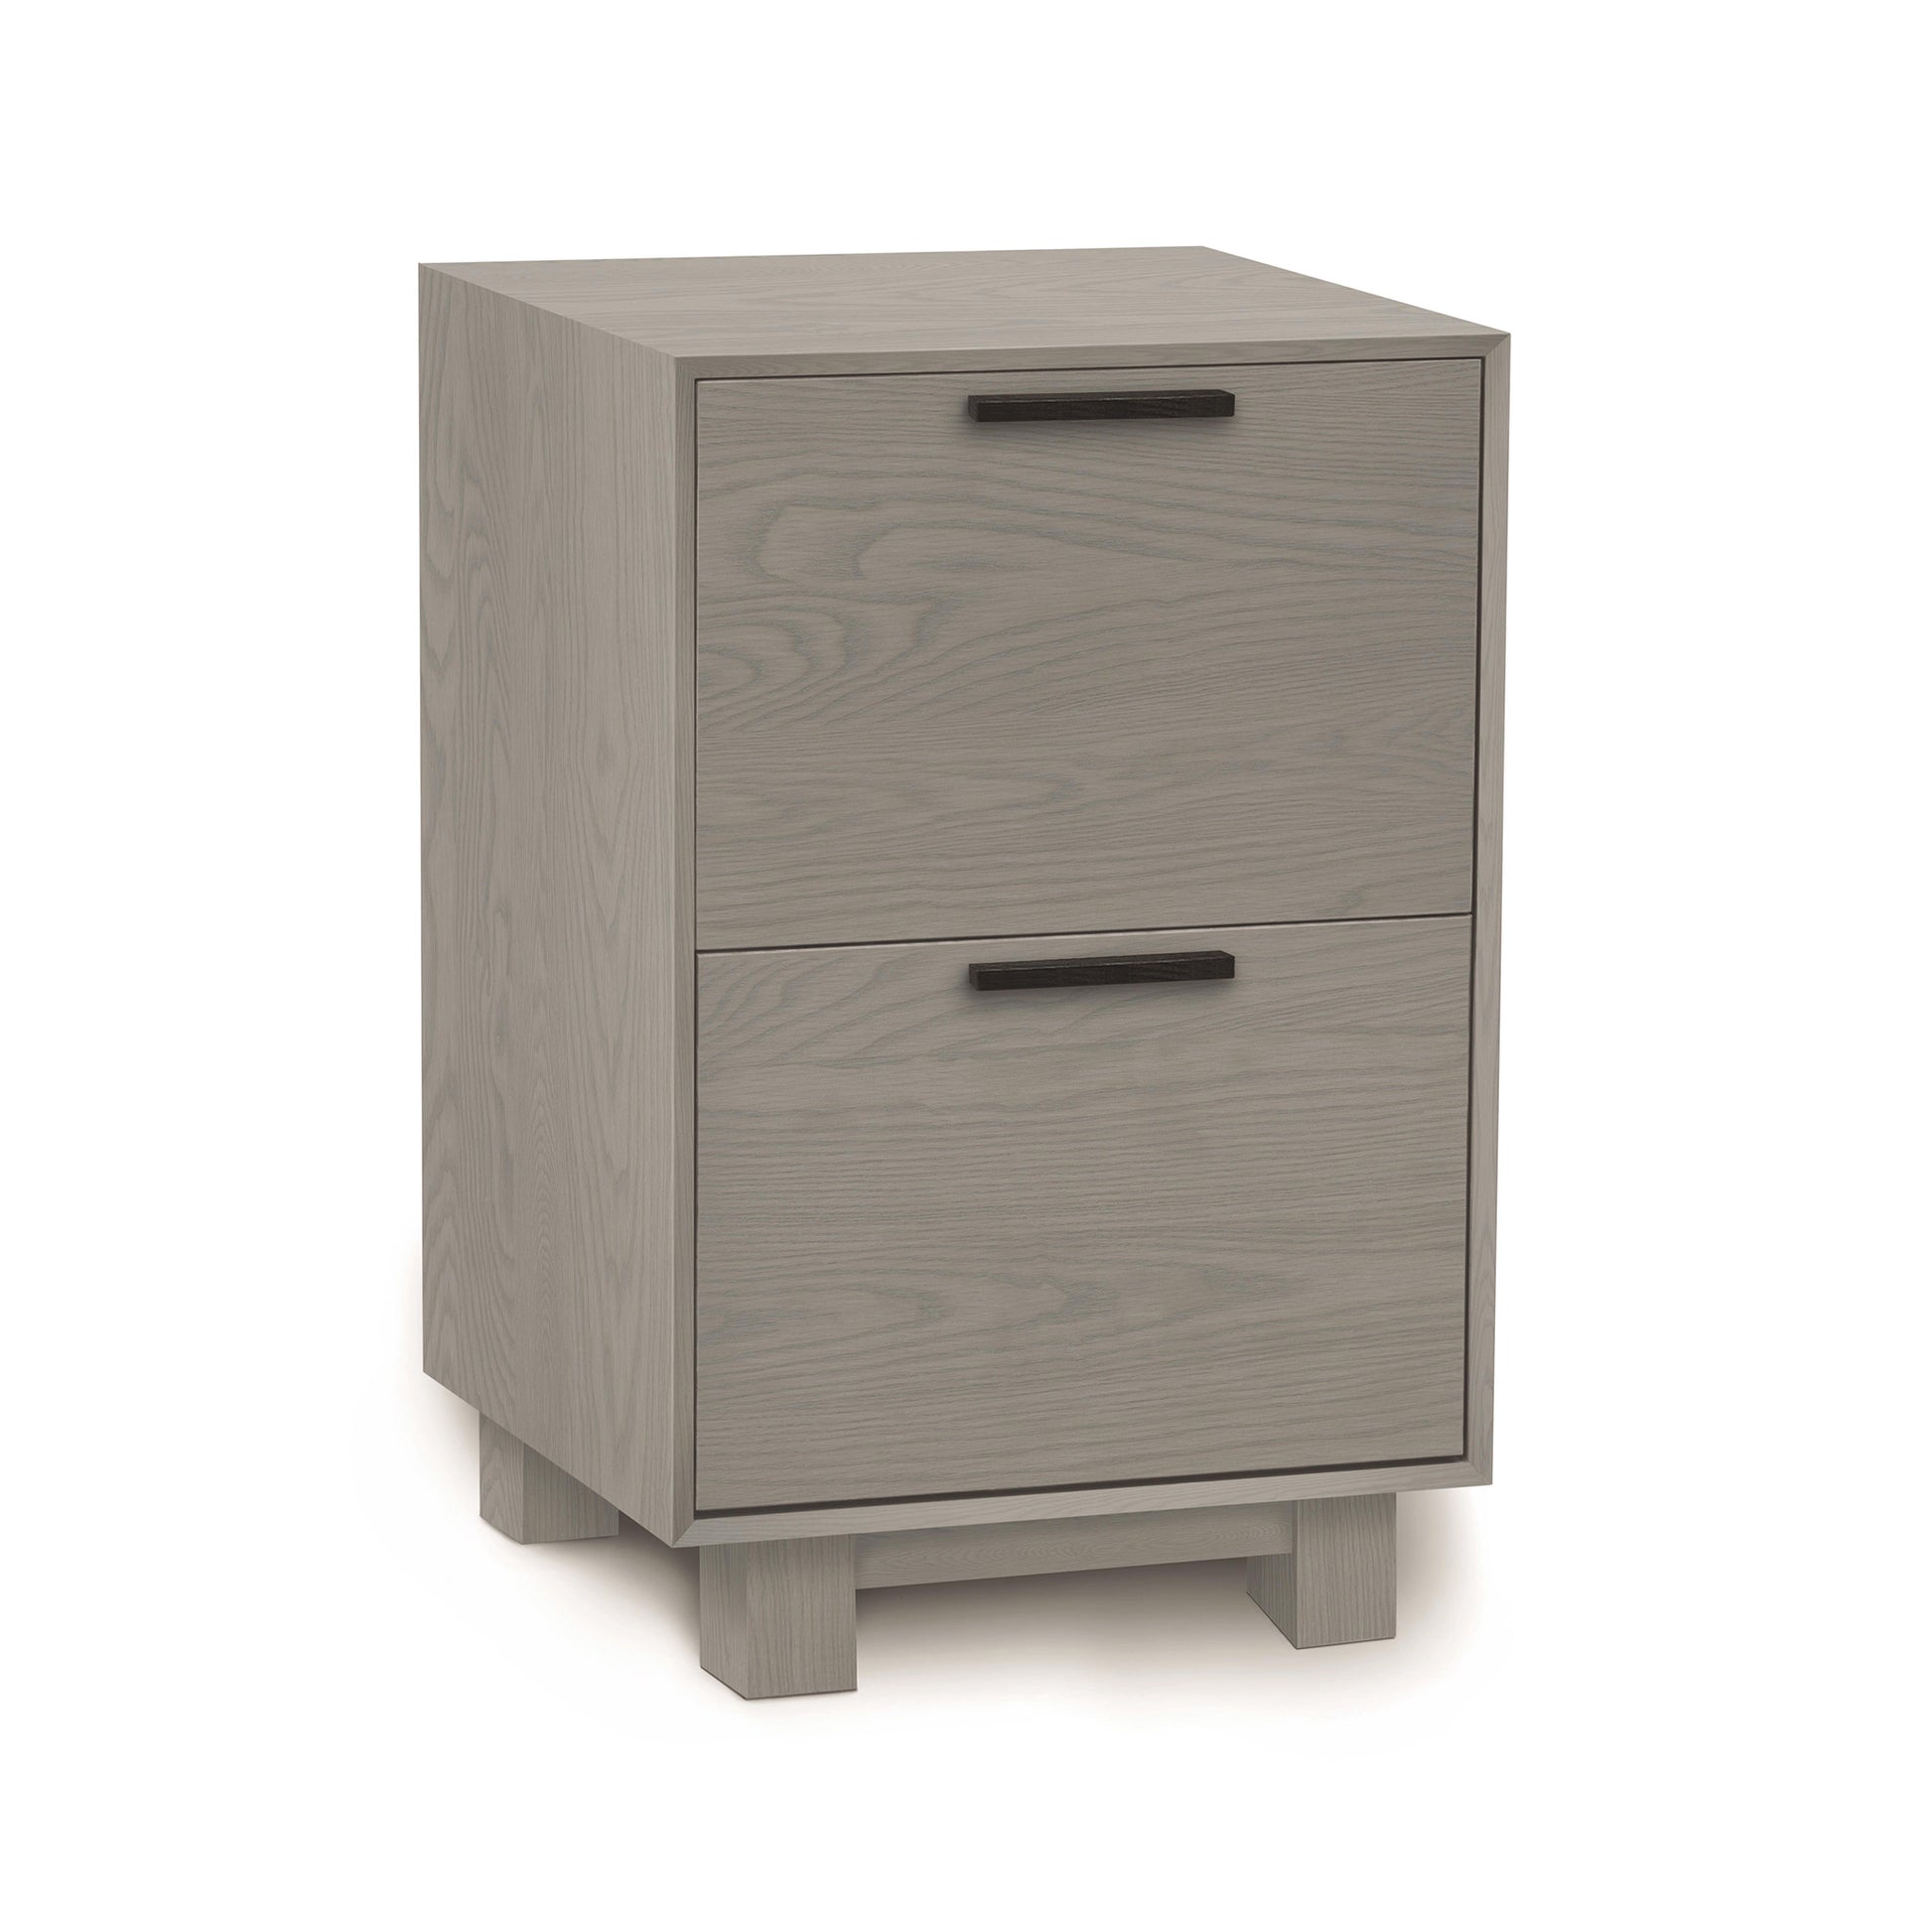 A modern two-drawer natural wood nightstand made from North American hardwoods, Copeland Furniture's Linear Narrow File Cabinet, on a white background.